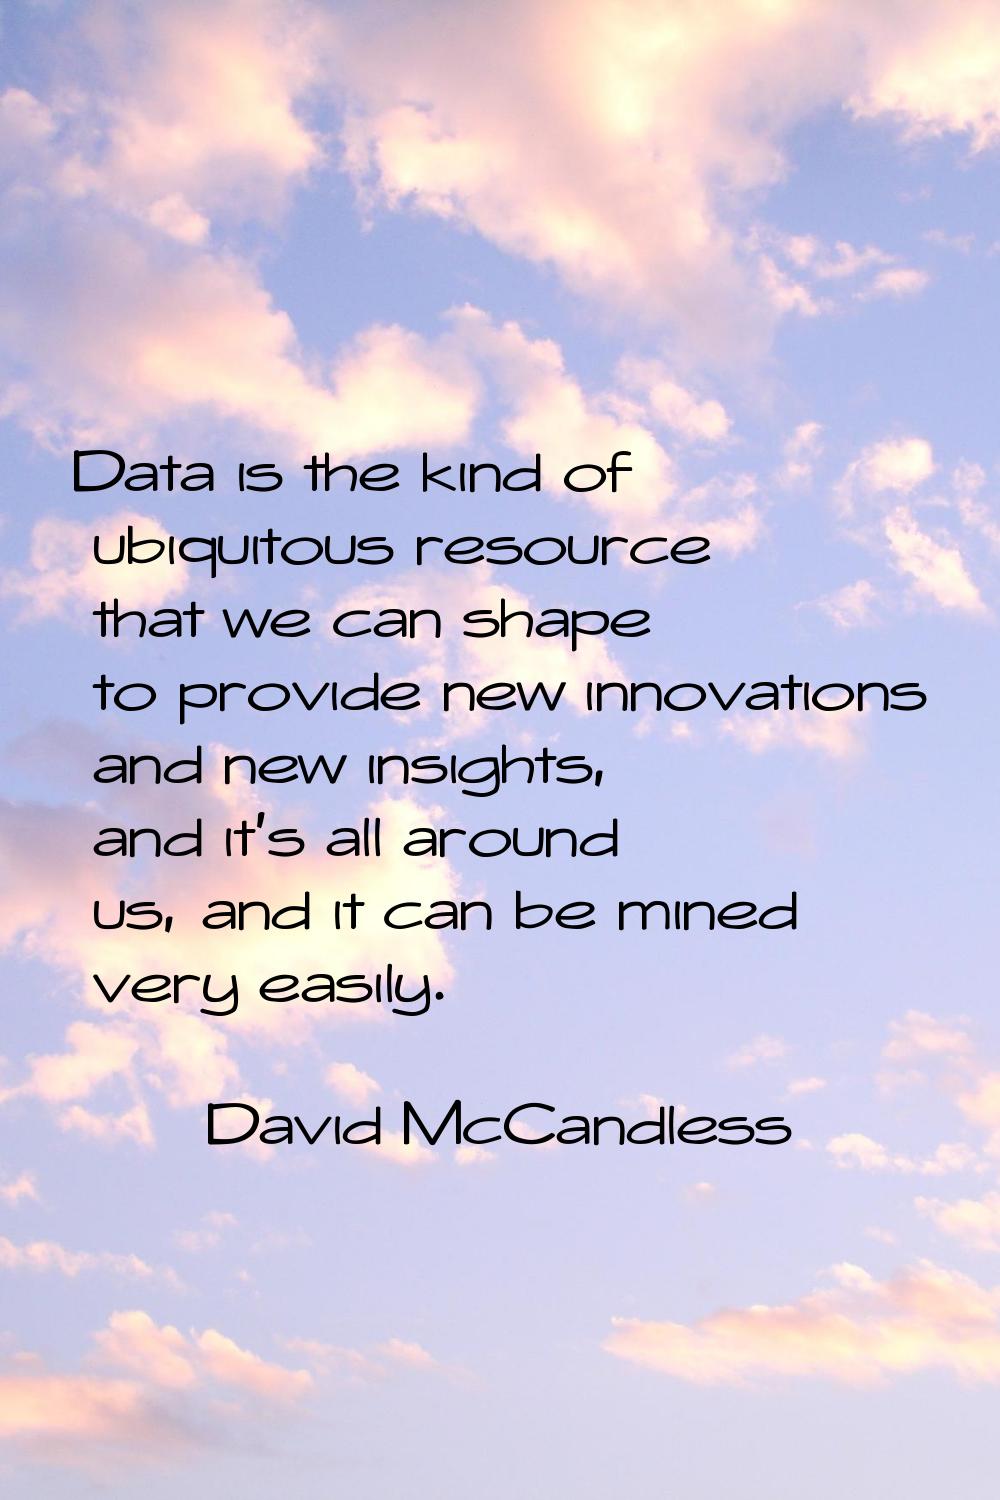 Data is the kind of ubiquitous resource that we can shape to provide new innovations and new insigh